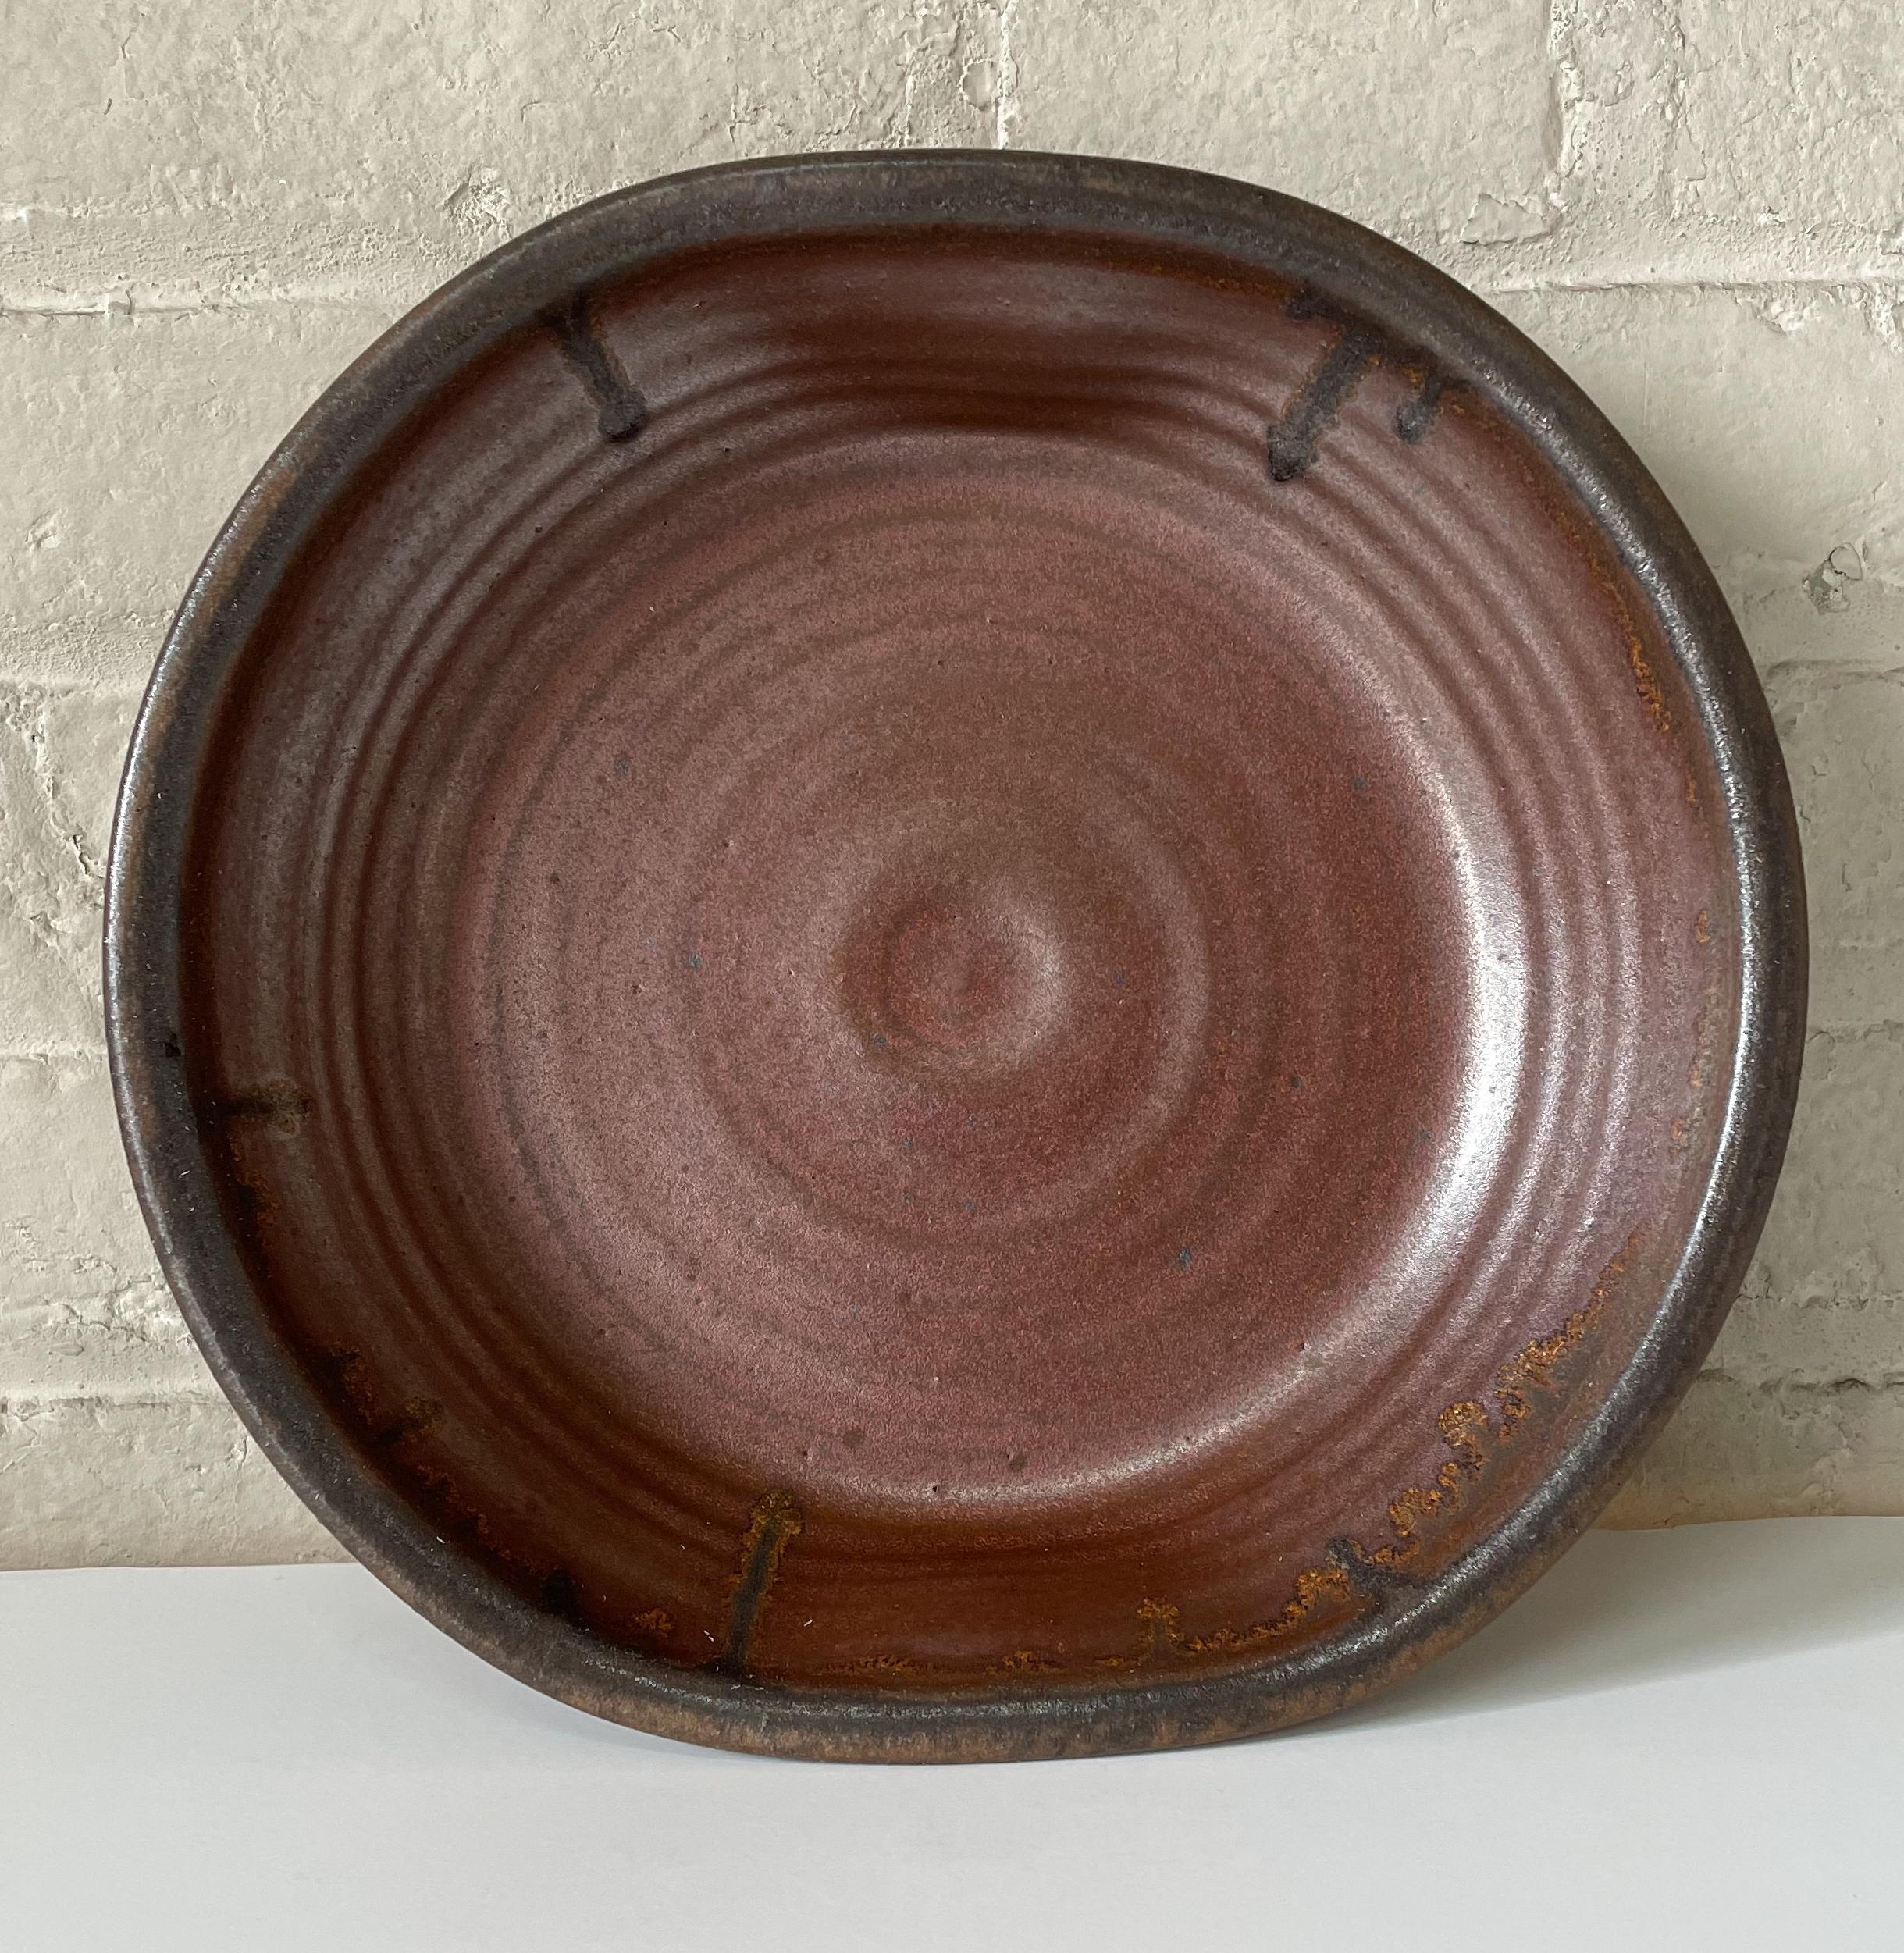 Hand-turned and glazed vessel of wood-fired stoneware by renowned American studio potter Karen Karnes. Drip overglaze blends brown with reddish brown and copper colors; lip and shoulder are pinched on opposite sides, creating an eccentric form.